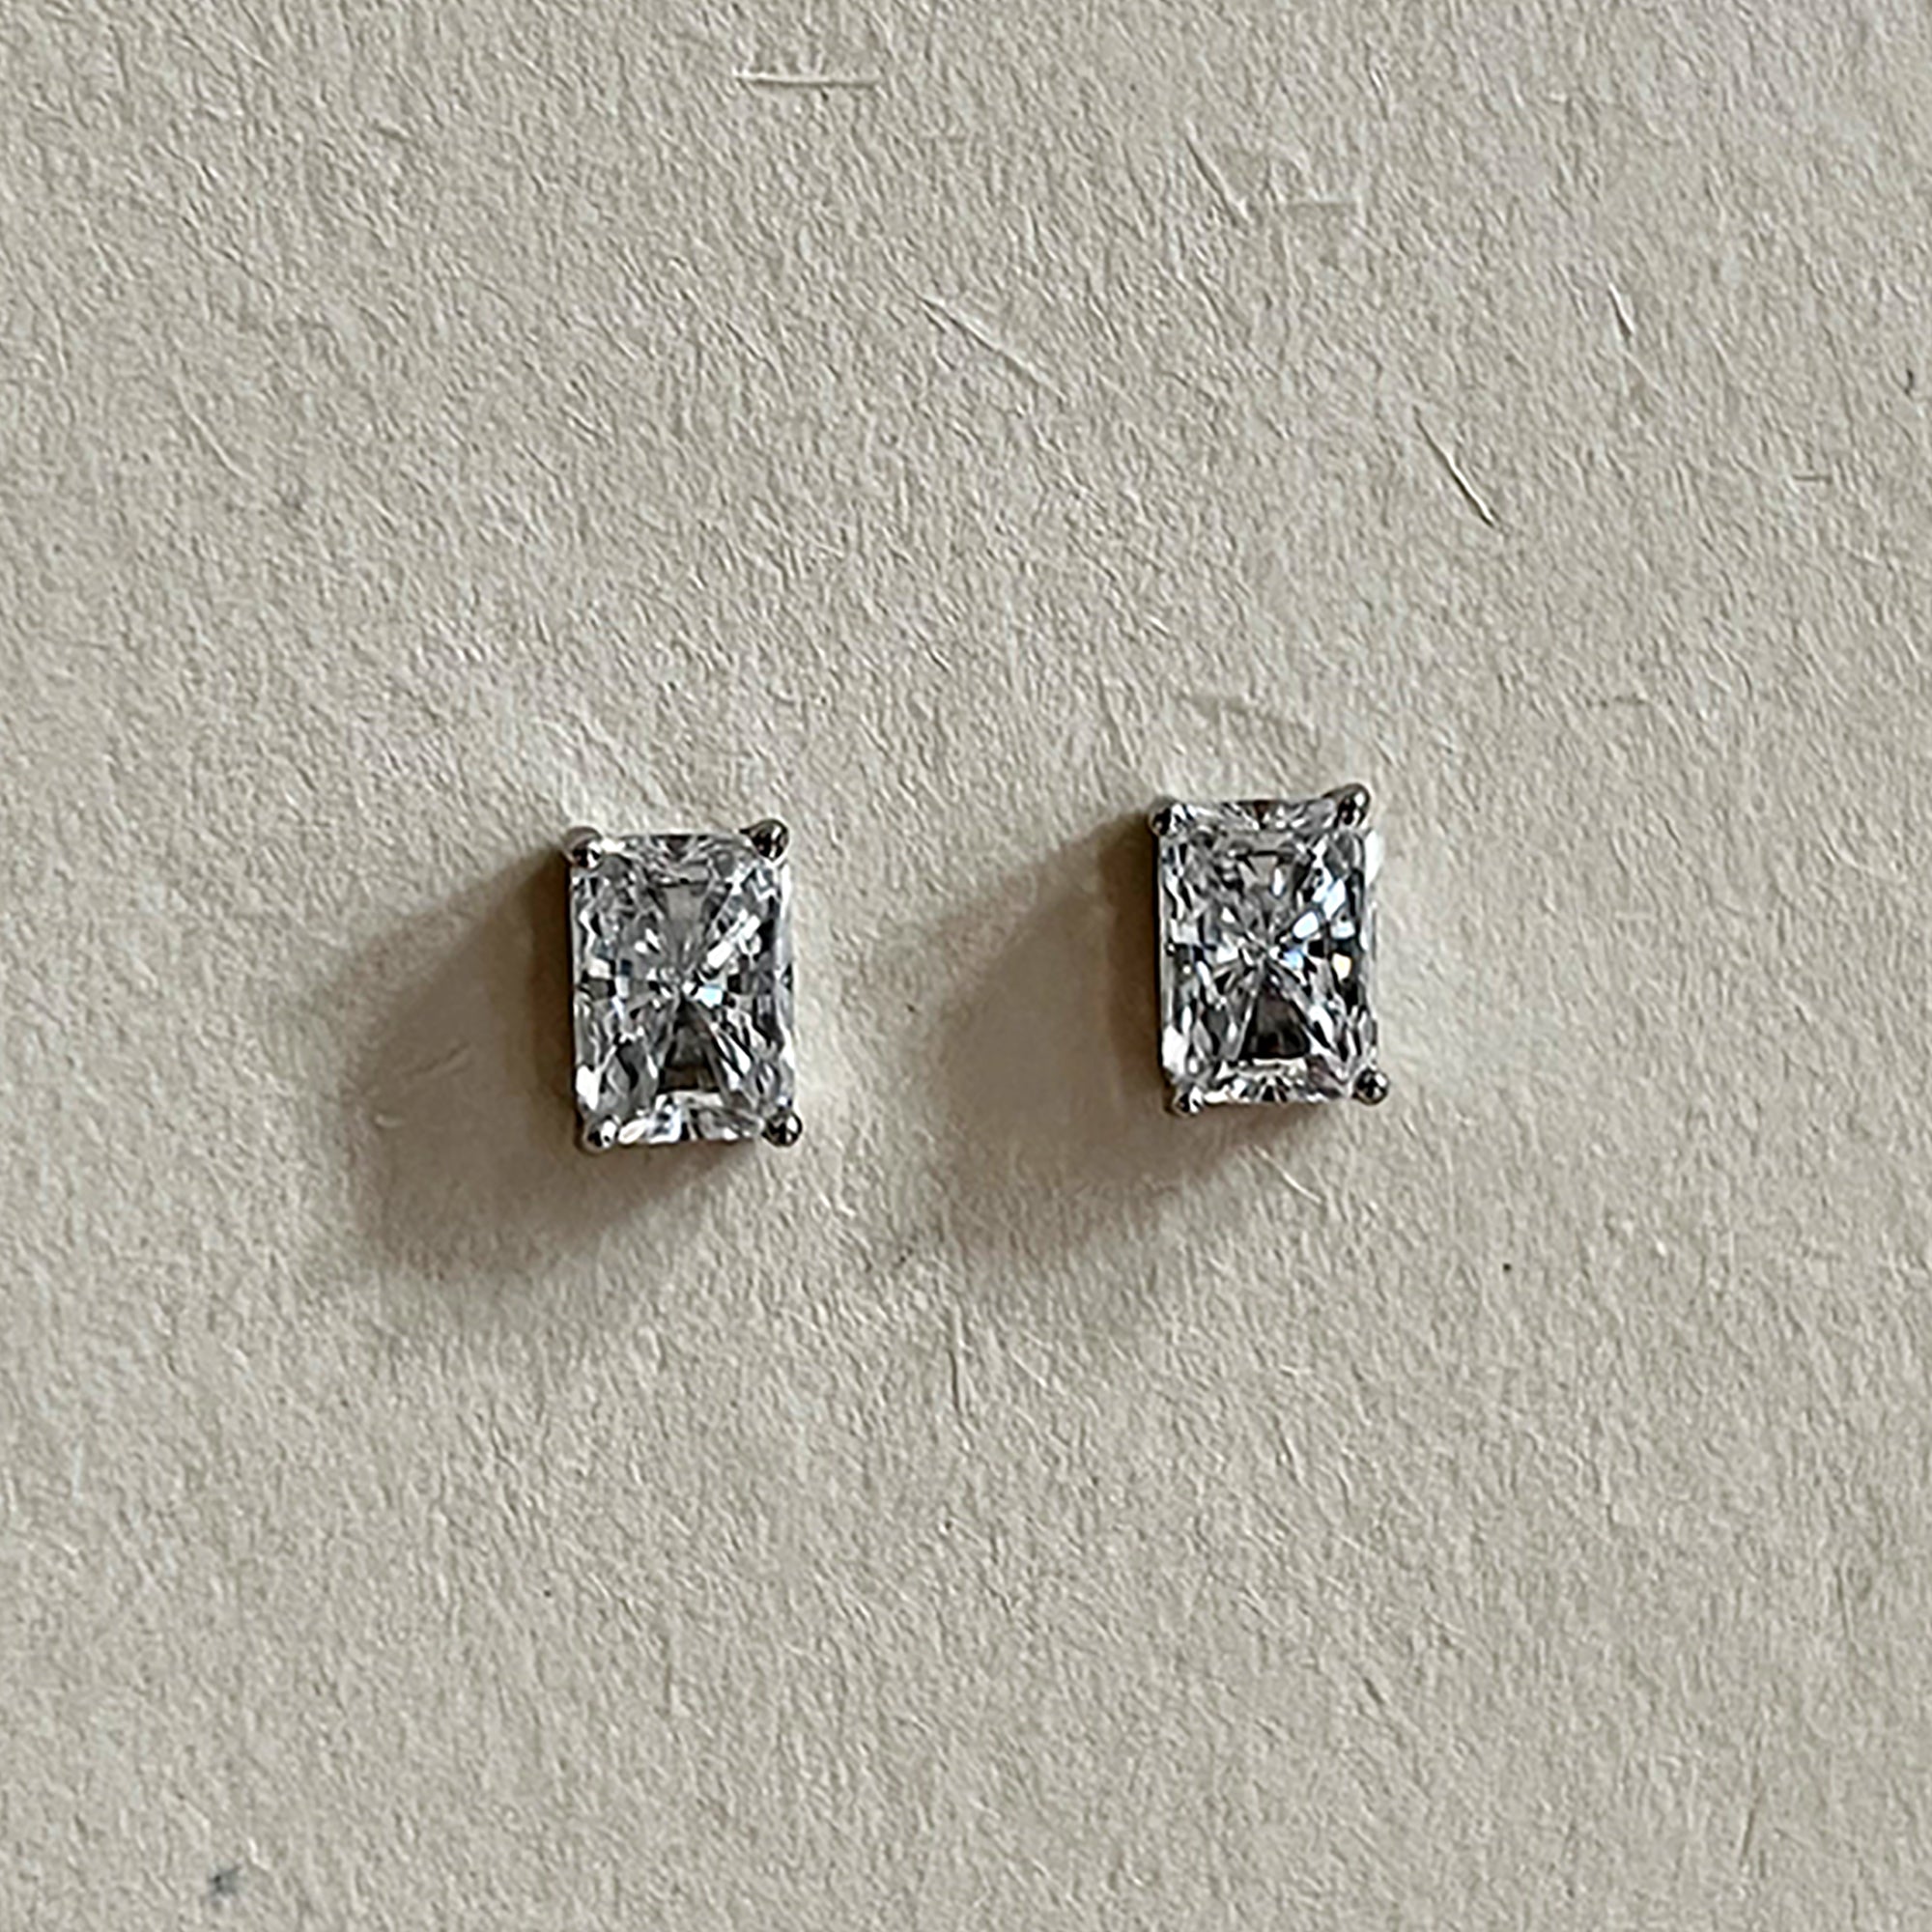 White Gold Plated Square CZ Stud Earrings wedding gift KOL influencer Wedding Anniversary gift party